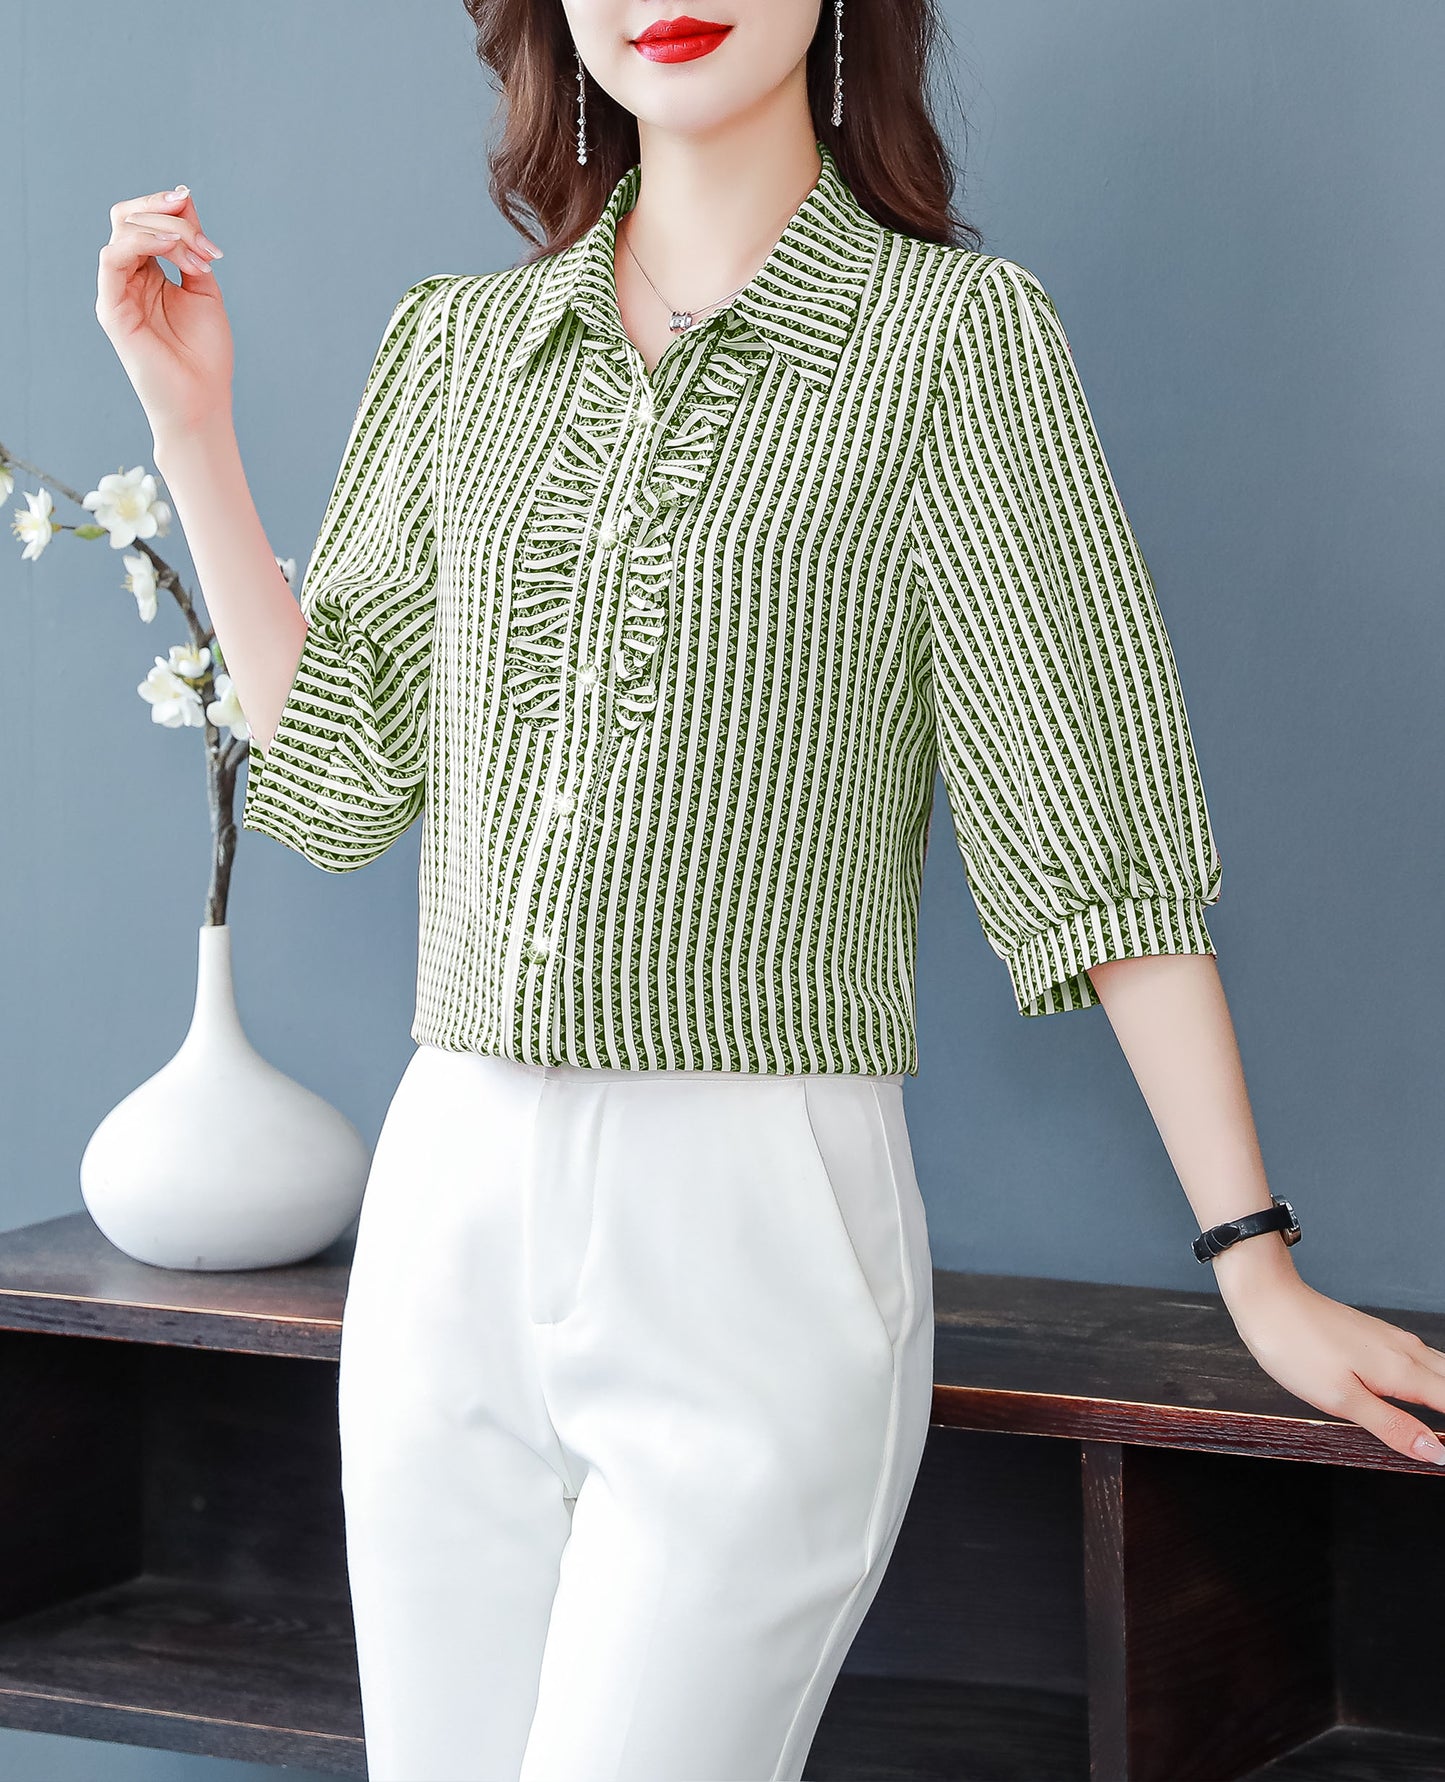 Green Stripe Tops Collared Neck Button Up Print Blouse